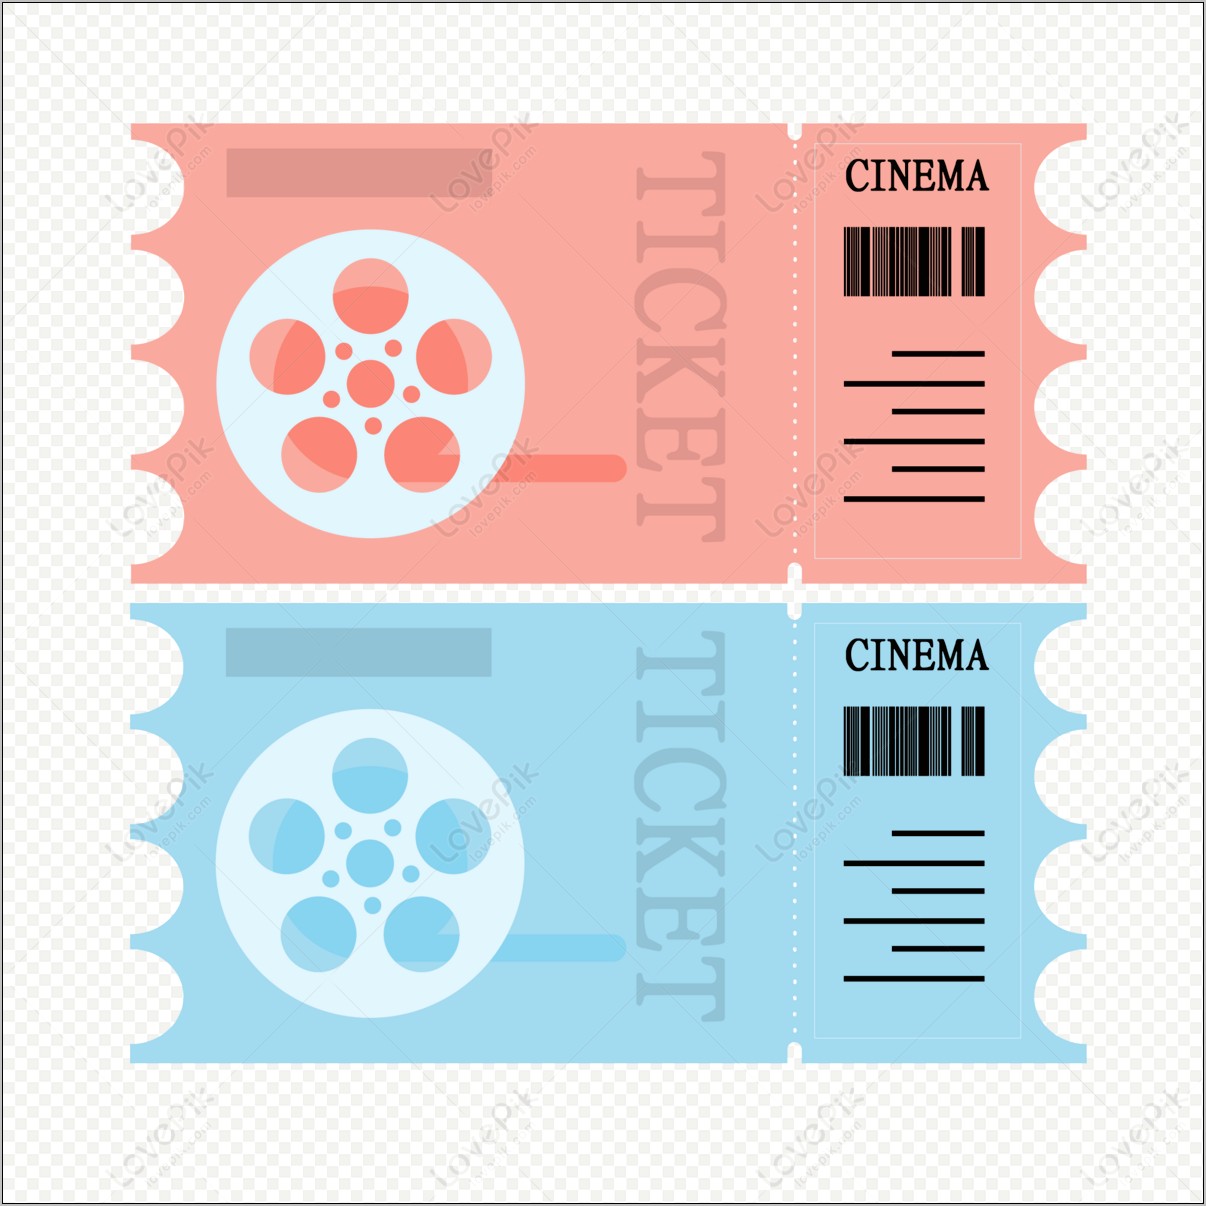 movie-ticket-booking-template-free-download-resume-example-gallery